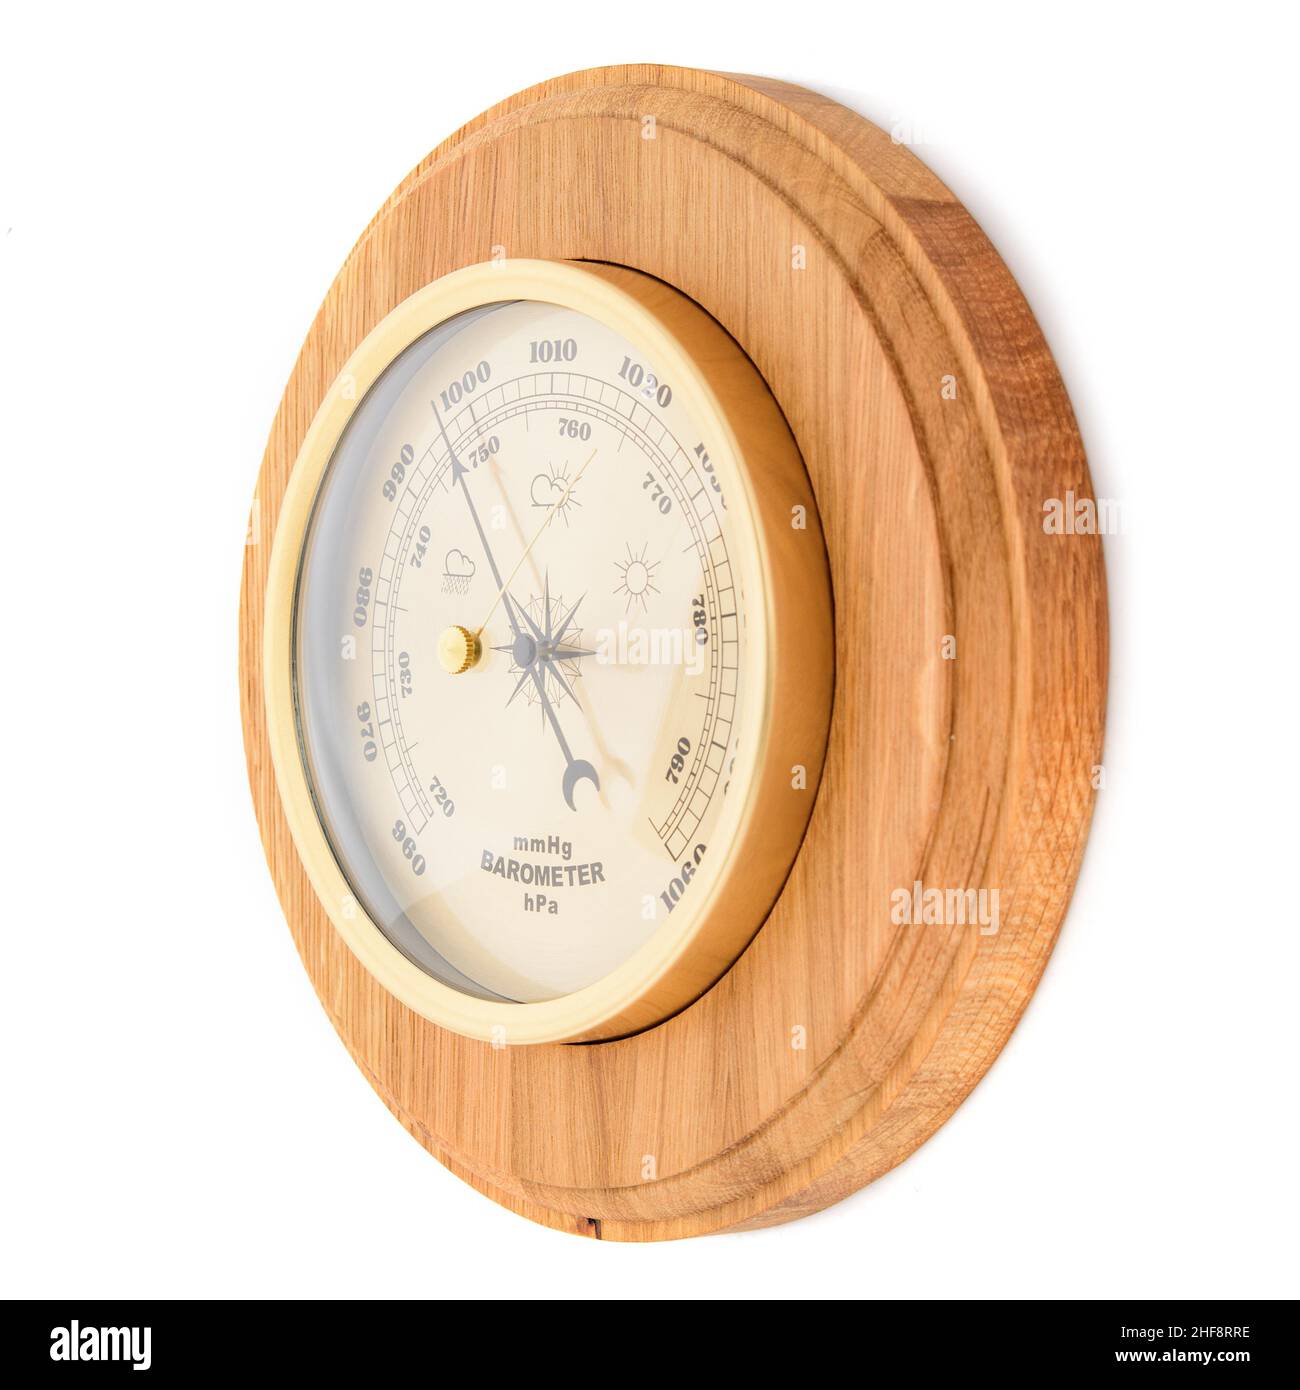 https://c8.alamy.com/comp/2HF8RRE/vintage-wooden-clock-with-barometer-and-old-marine-style-thermometer-on-a-white-background-wall-decor-for-the-interior-2HF8RRE.jpg